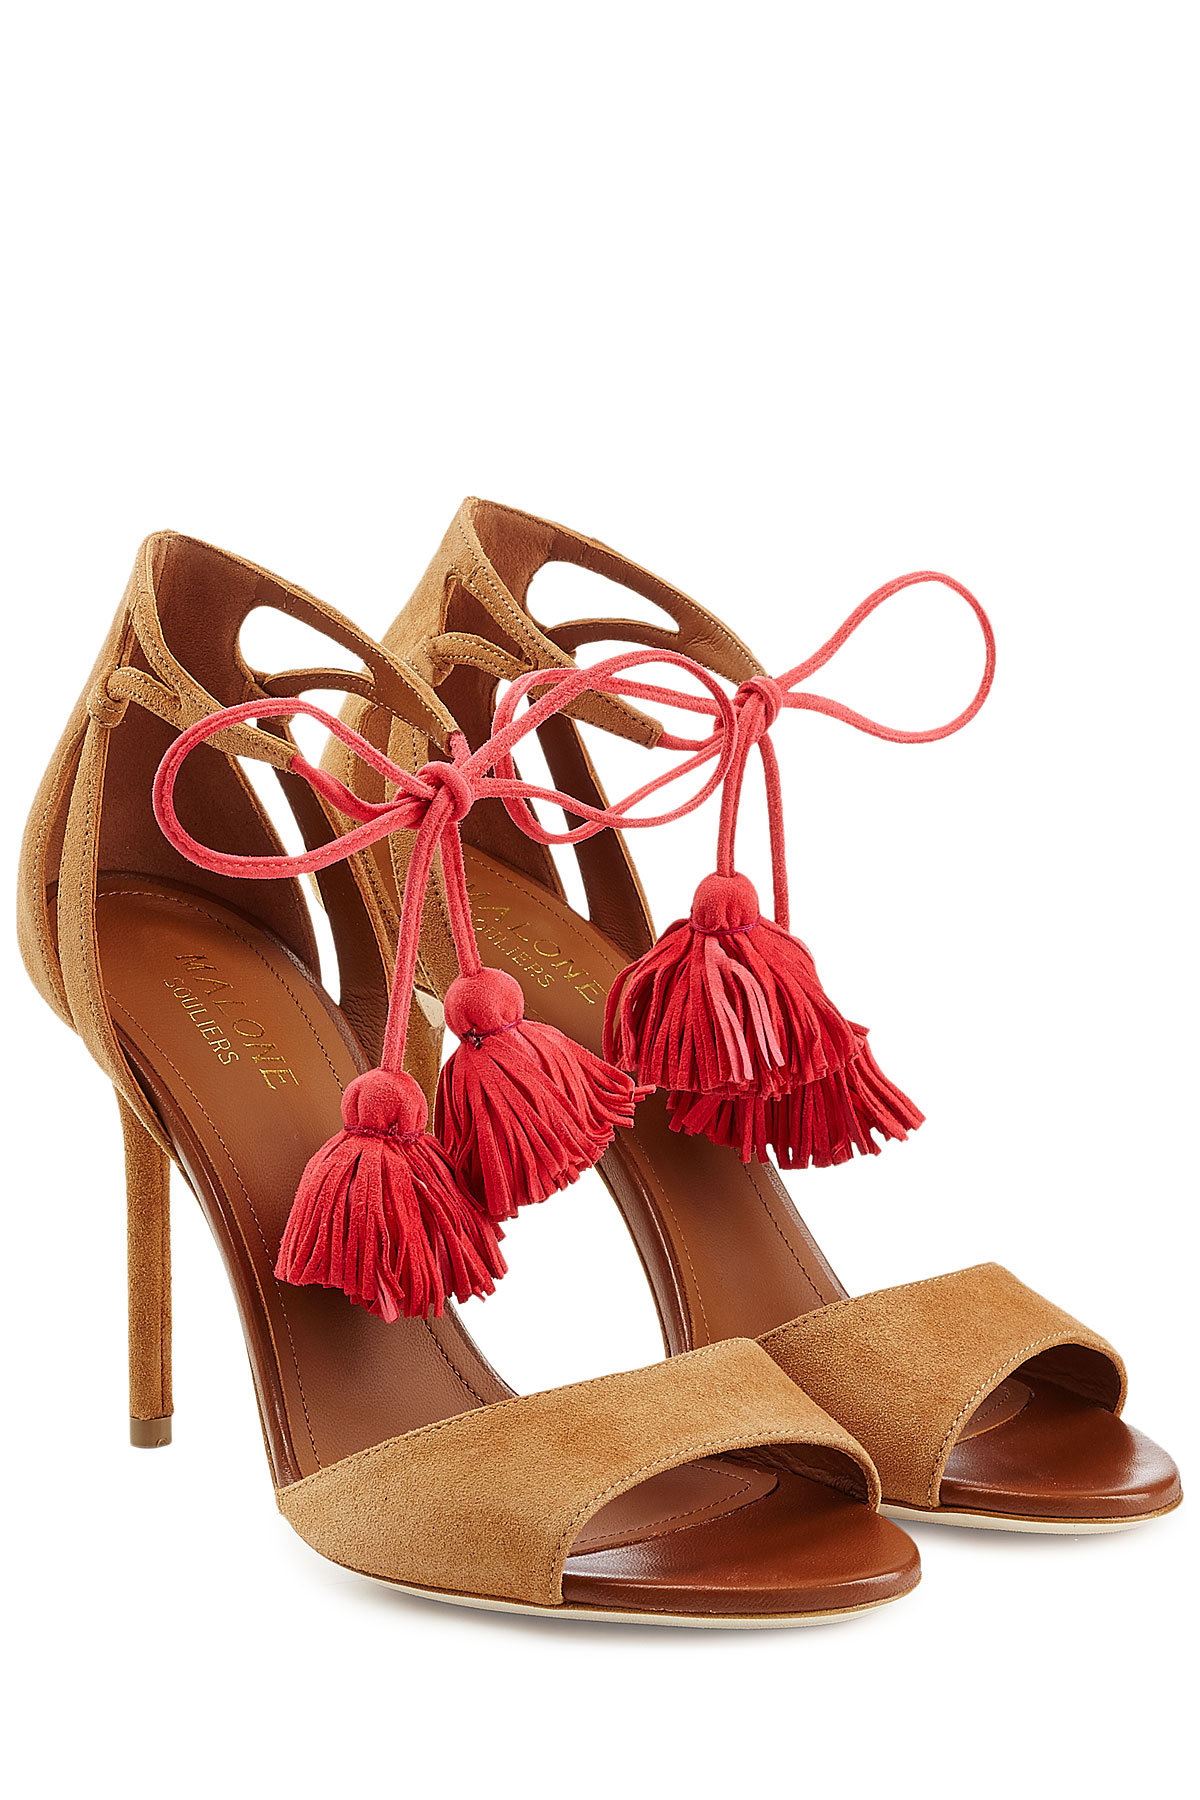 Malone Souliers - Ida Suede Sandals with Tassels